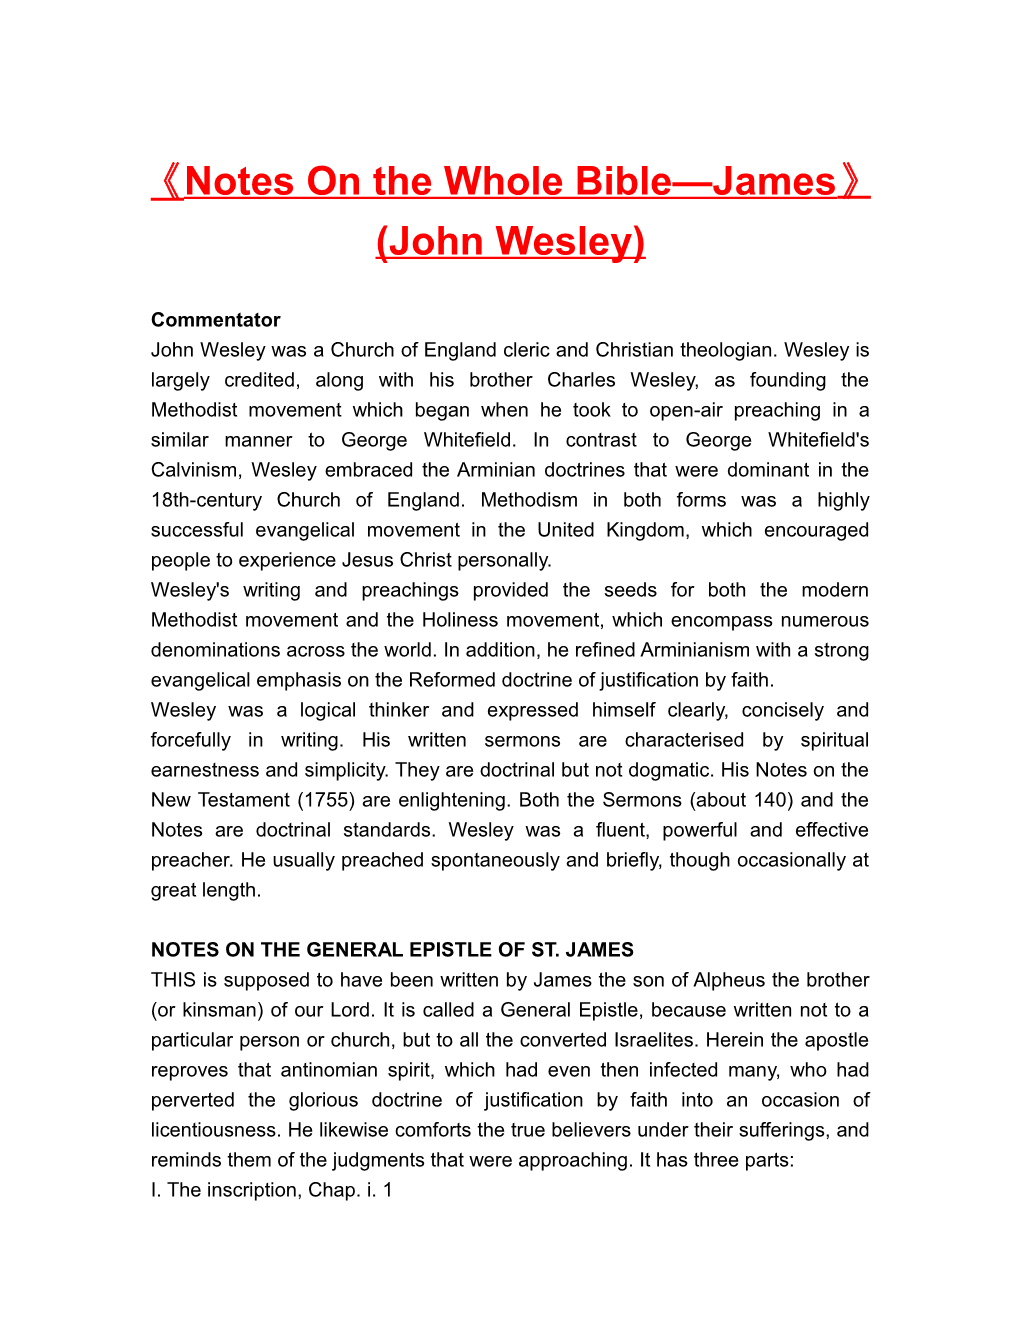 Notes on the Whole Bible James (John Wesley)